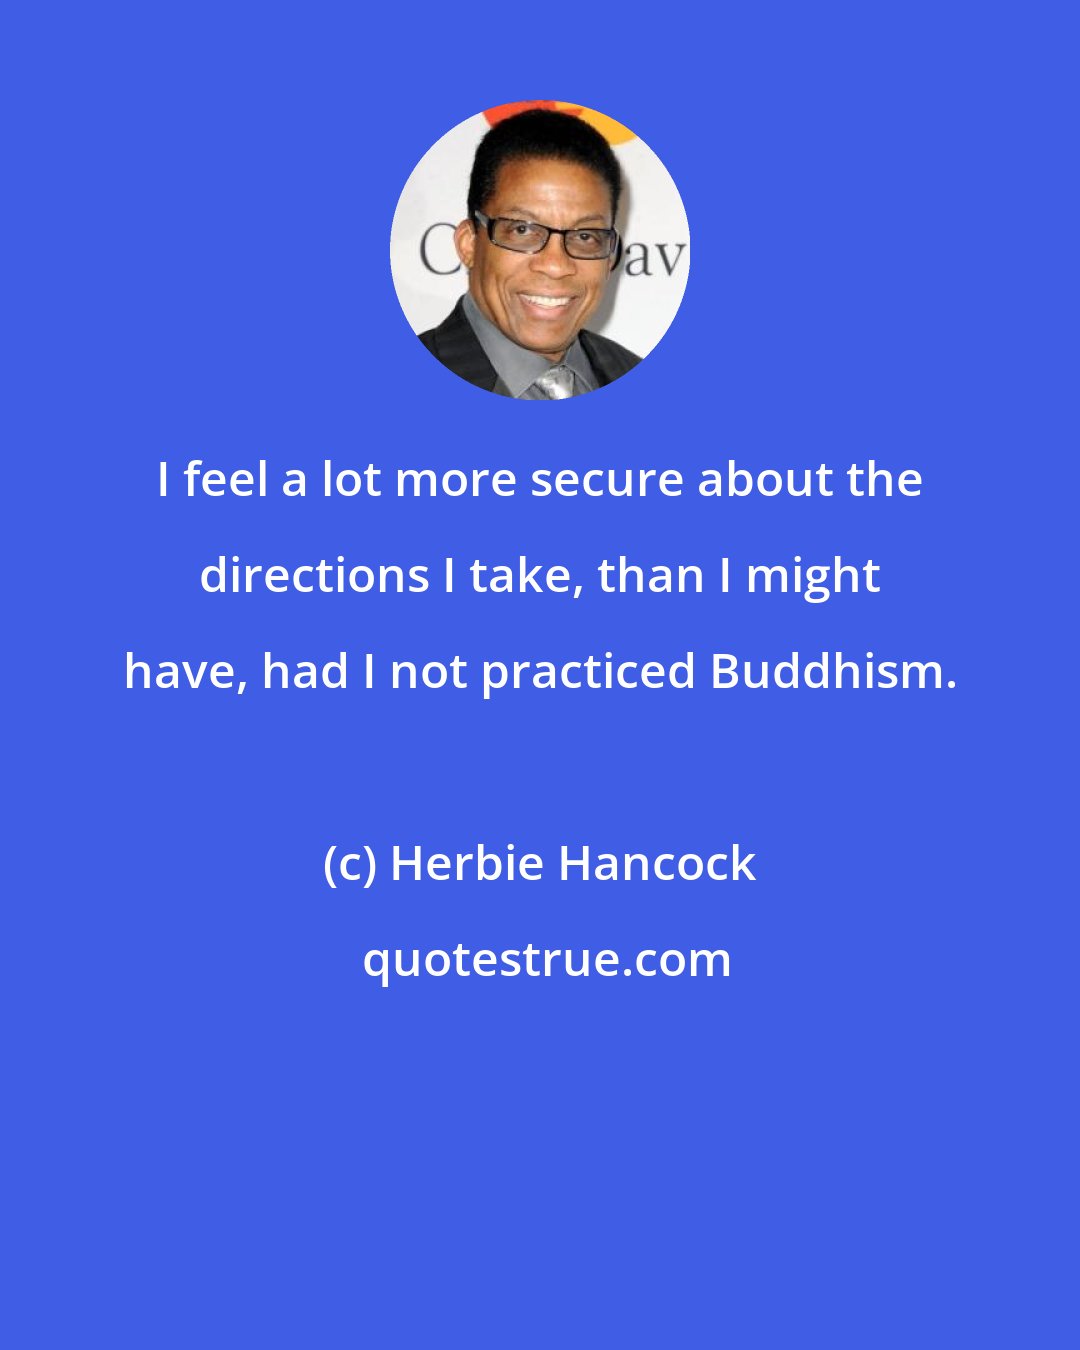 Herbie Hancock: I feel a lot more secure about the directions I take, than I might have, had I not practiced Buddhism.